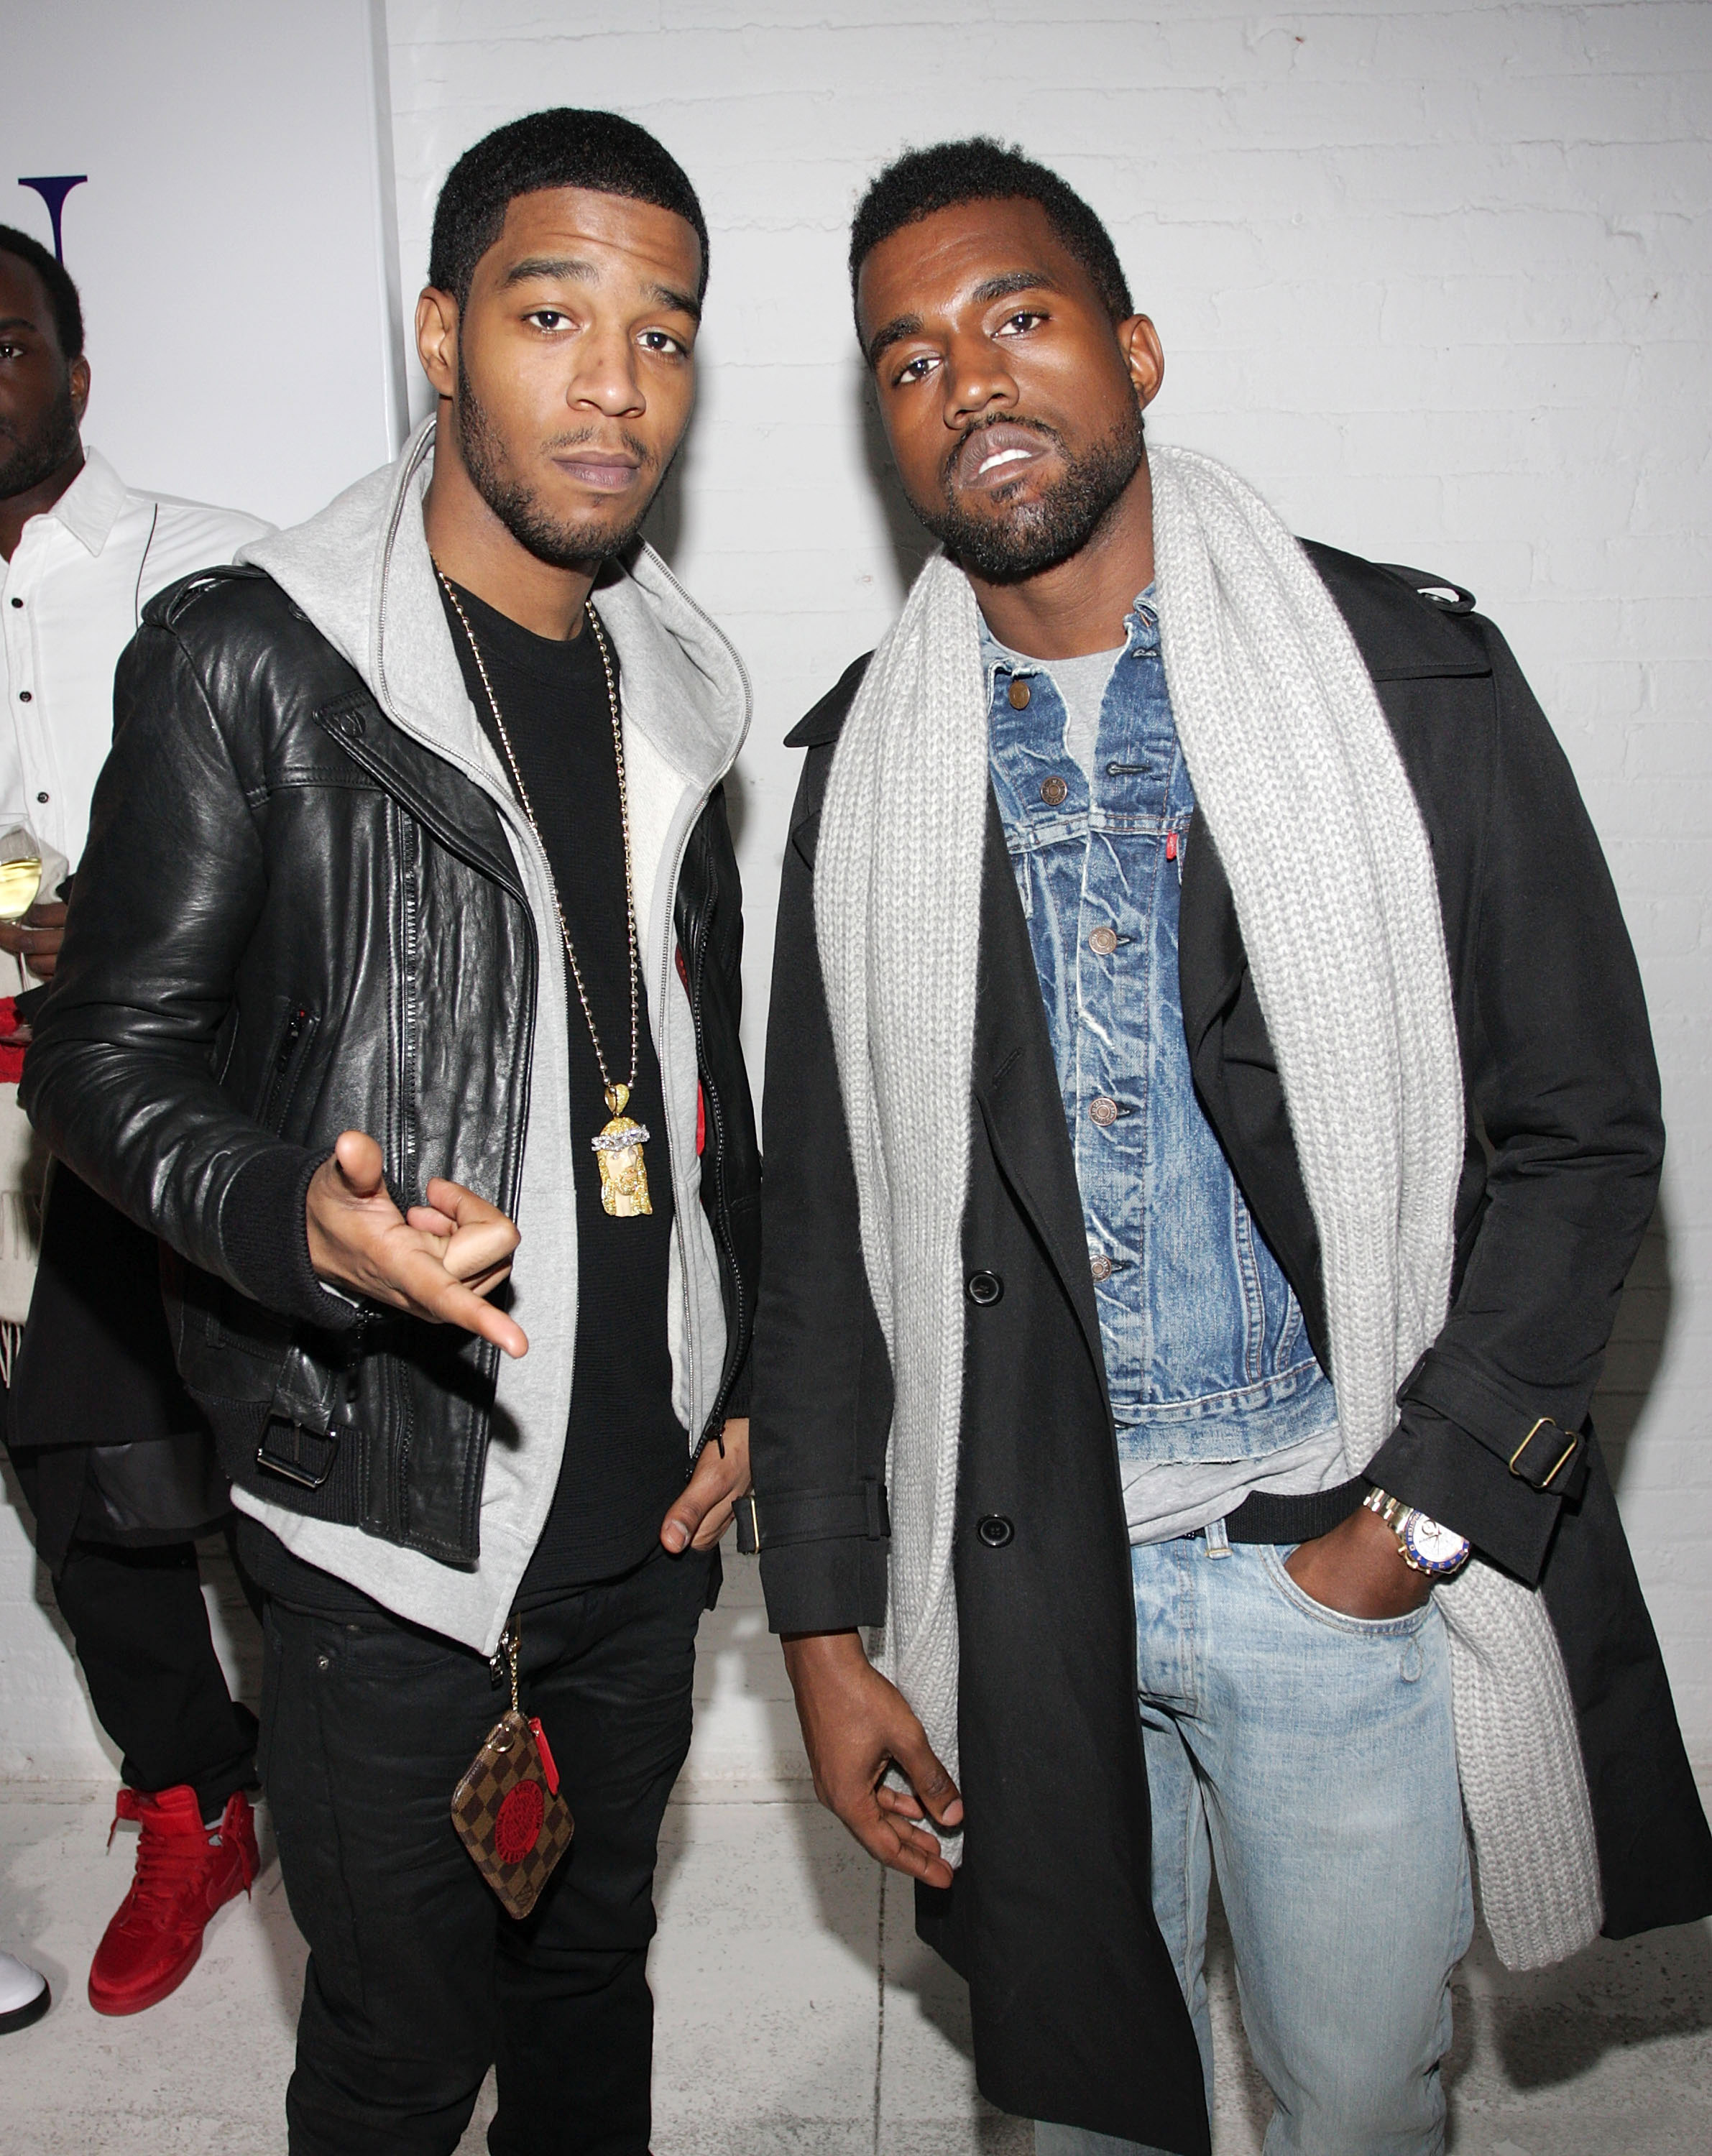 NEW YORK - FEBRUARY 16:  Kid Cudi and Kanye West attend the Michael Bastian presentation during Mercedes-Benz Fashion Week Fall 2009 at 637 West 27th Street on February 16, 2009 in New York City.  (Photo by Jerritt Clark/WireImage)